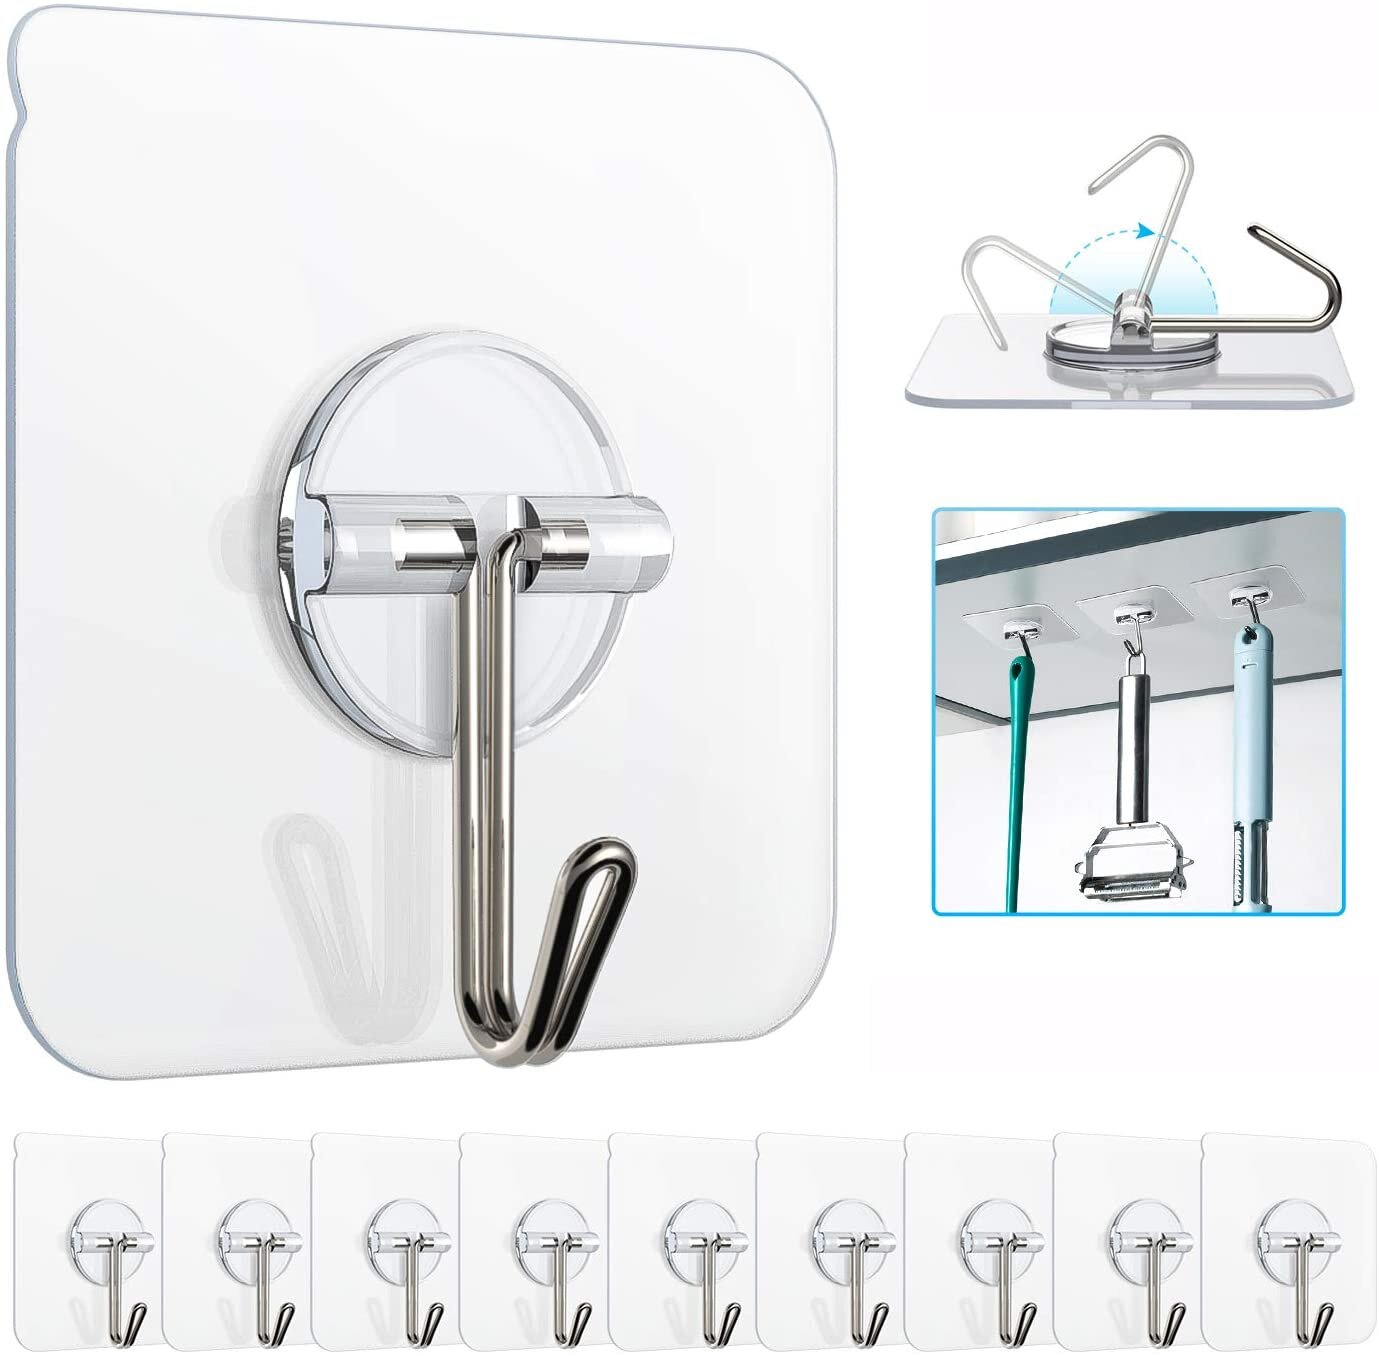 Waterproof OMID Adhesive Hooks Stainless Steel Towel Coat Hooks Wall Mount Hook for Hanging Robe Hook Cabinet Closet No Drill No Screw 4 Pack for Kitchen Bathroom Toilet Room Office